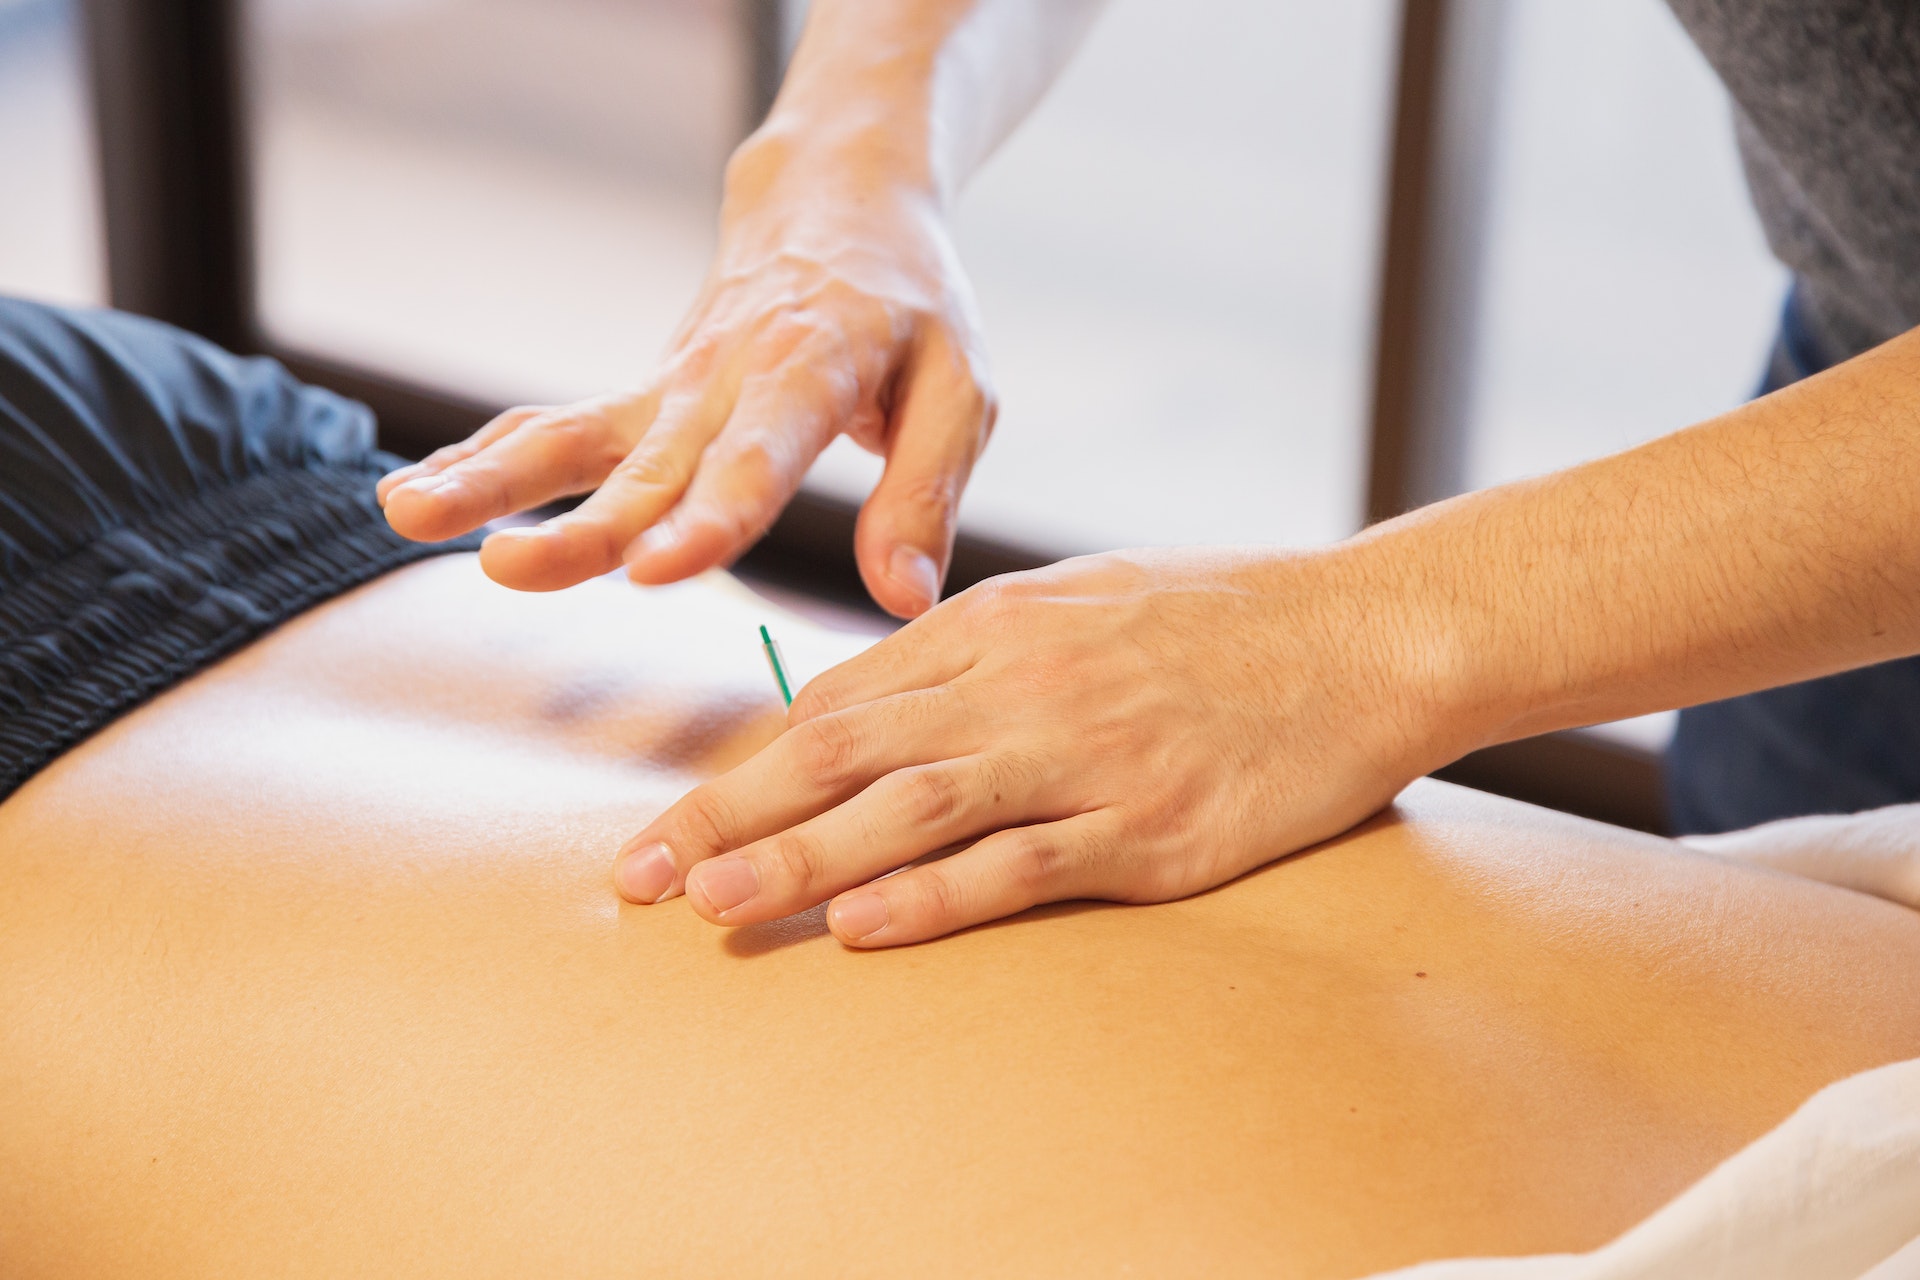 Can Acupuncture Help Chronic Kidney Disease?